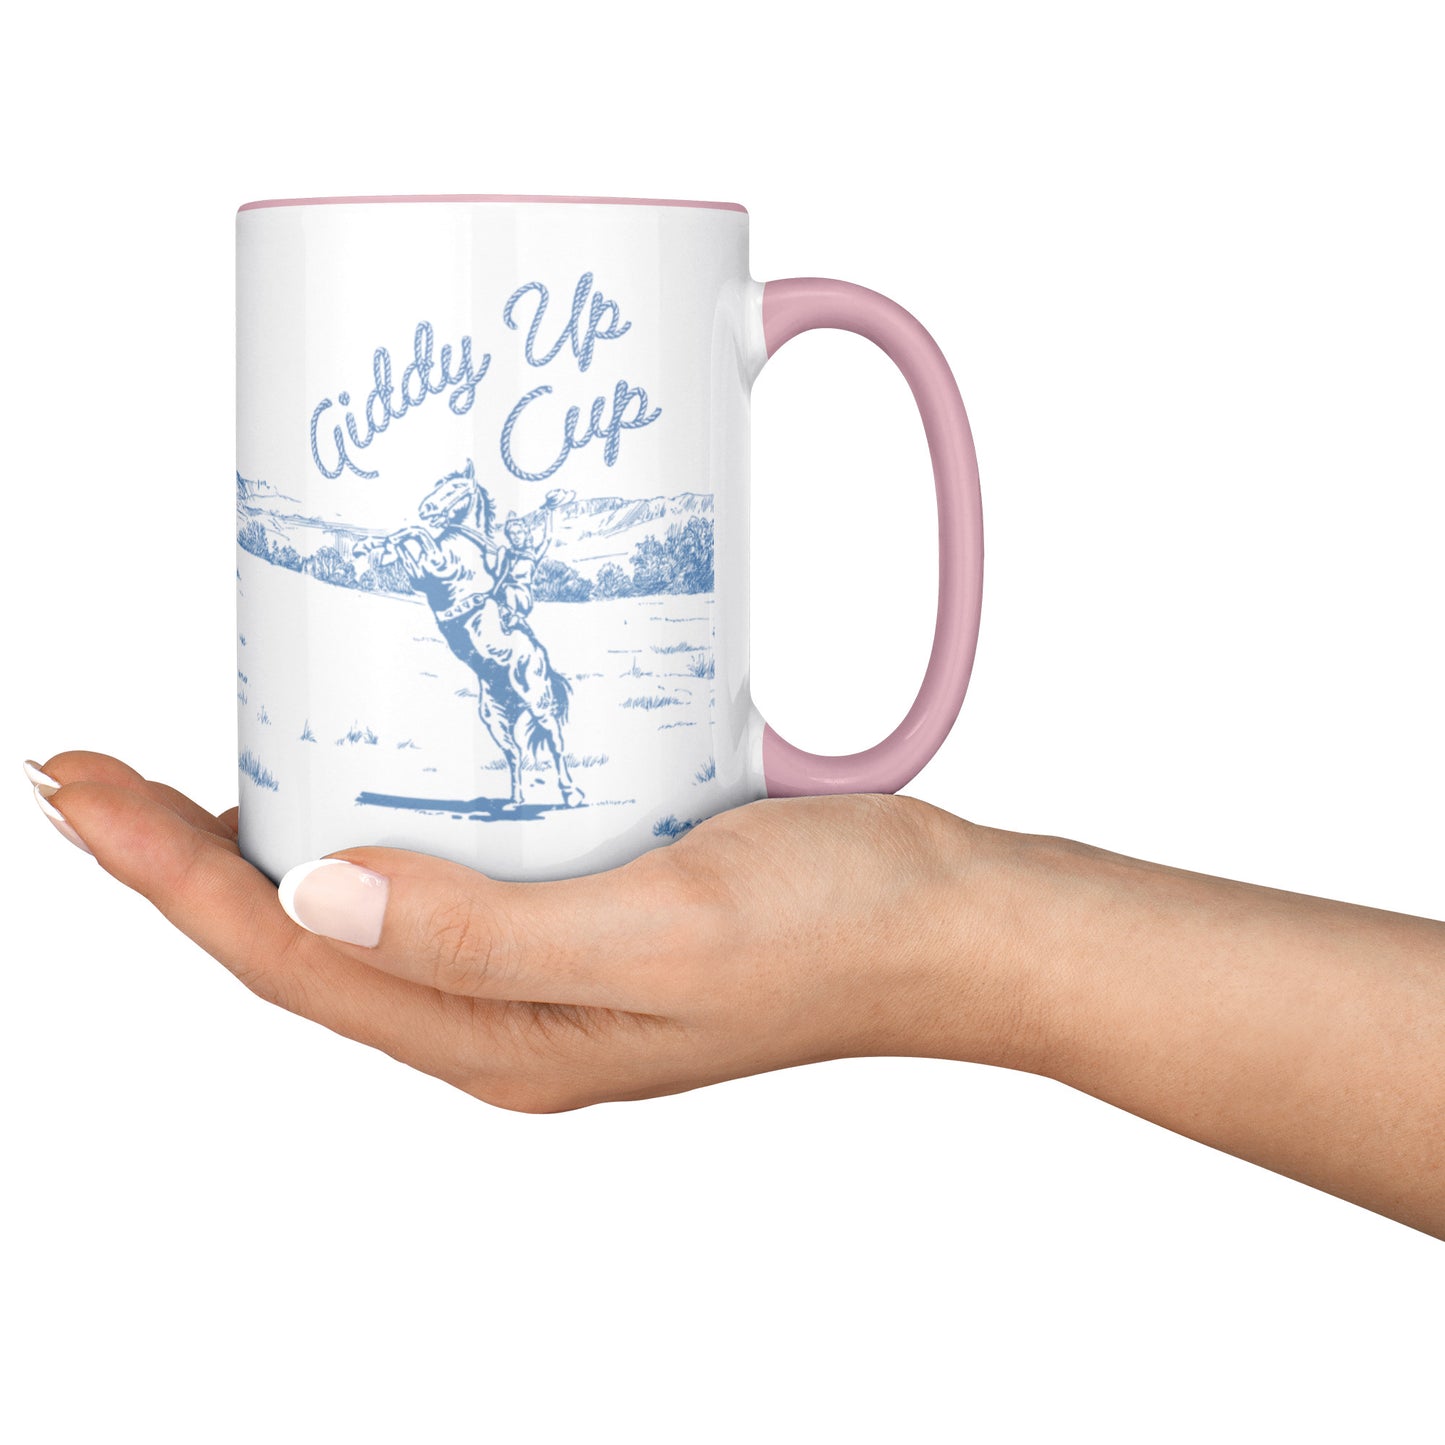 GIDDY UP CUP - PINK handle-- BLUE + PURPLE DESIGN